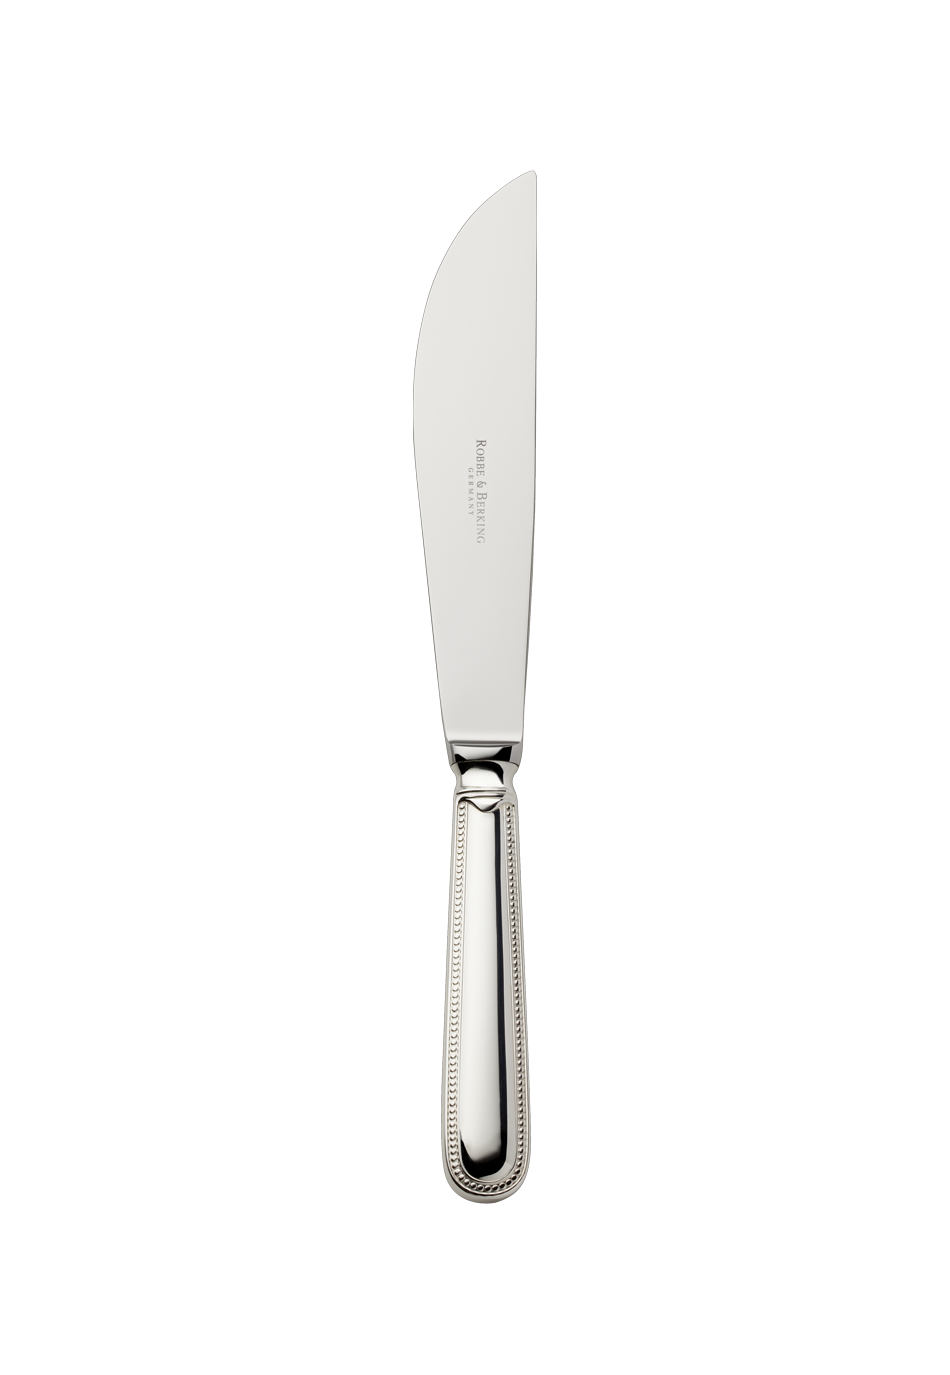 Franz. Perl Carving Knife (150g massive silverplated)